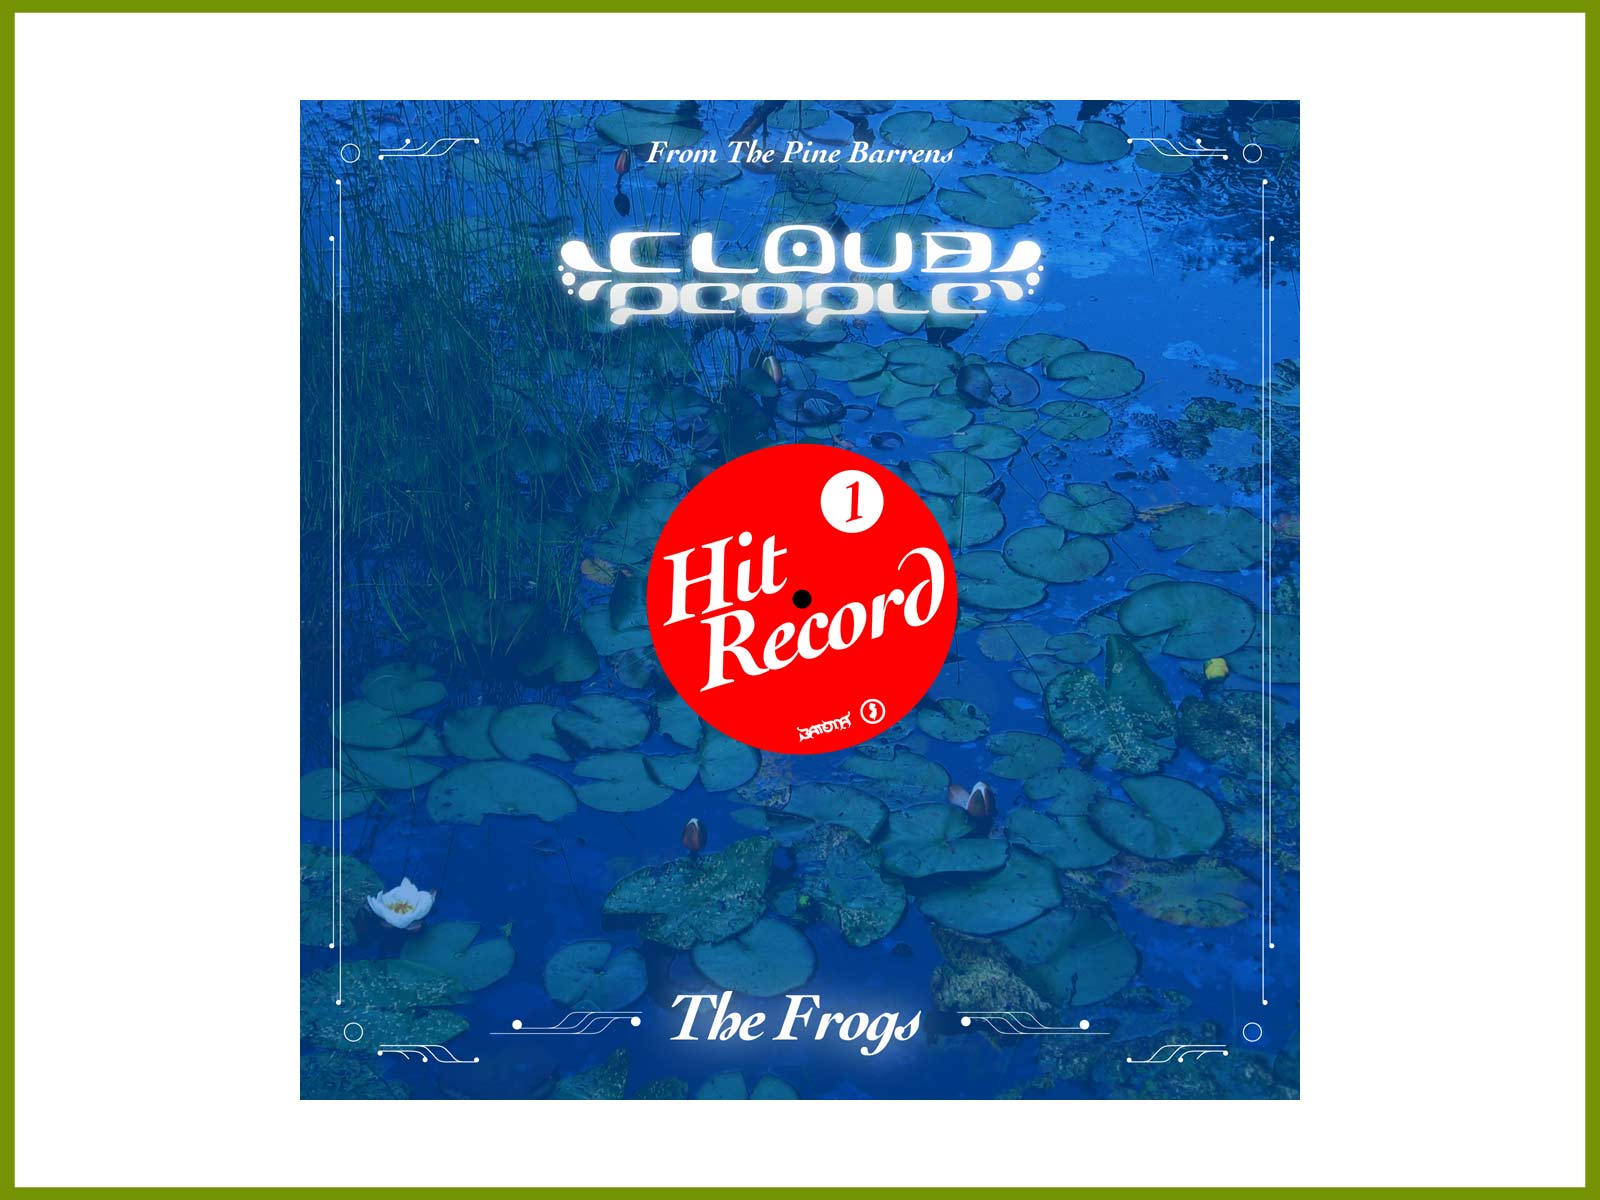 Introducing new Cloud People field recording series “Hit Record”